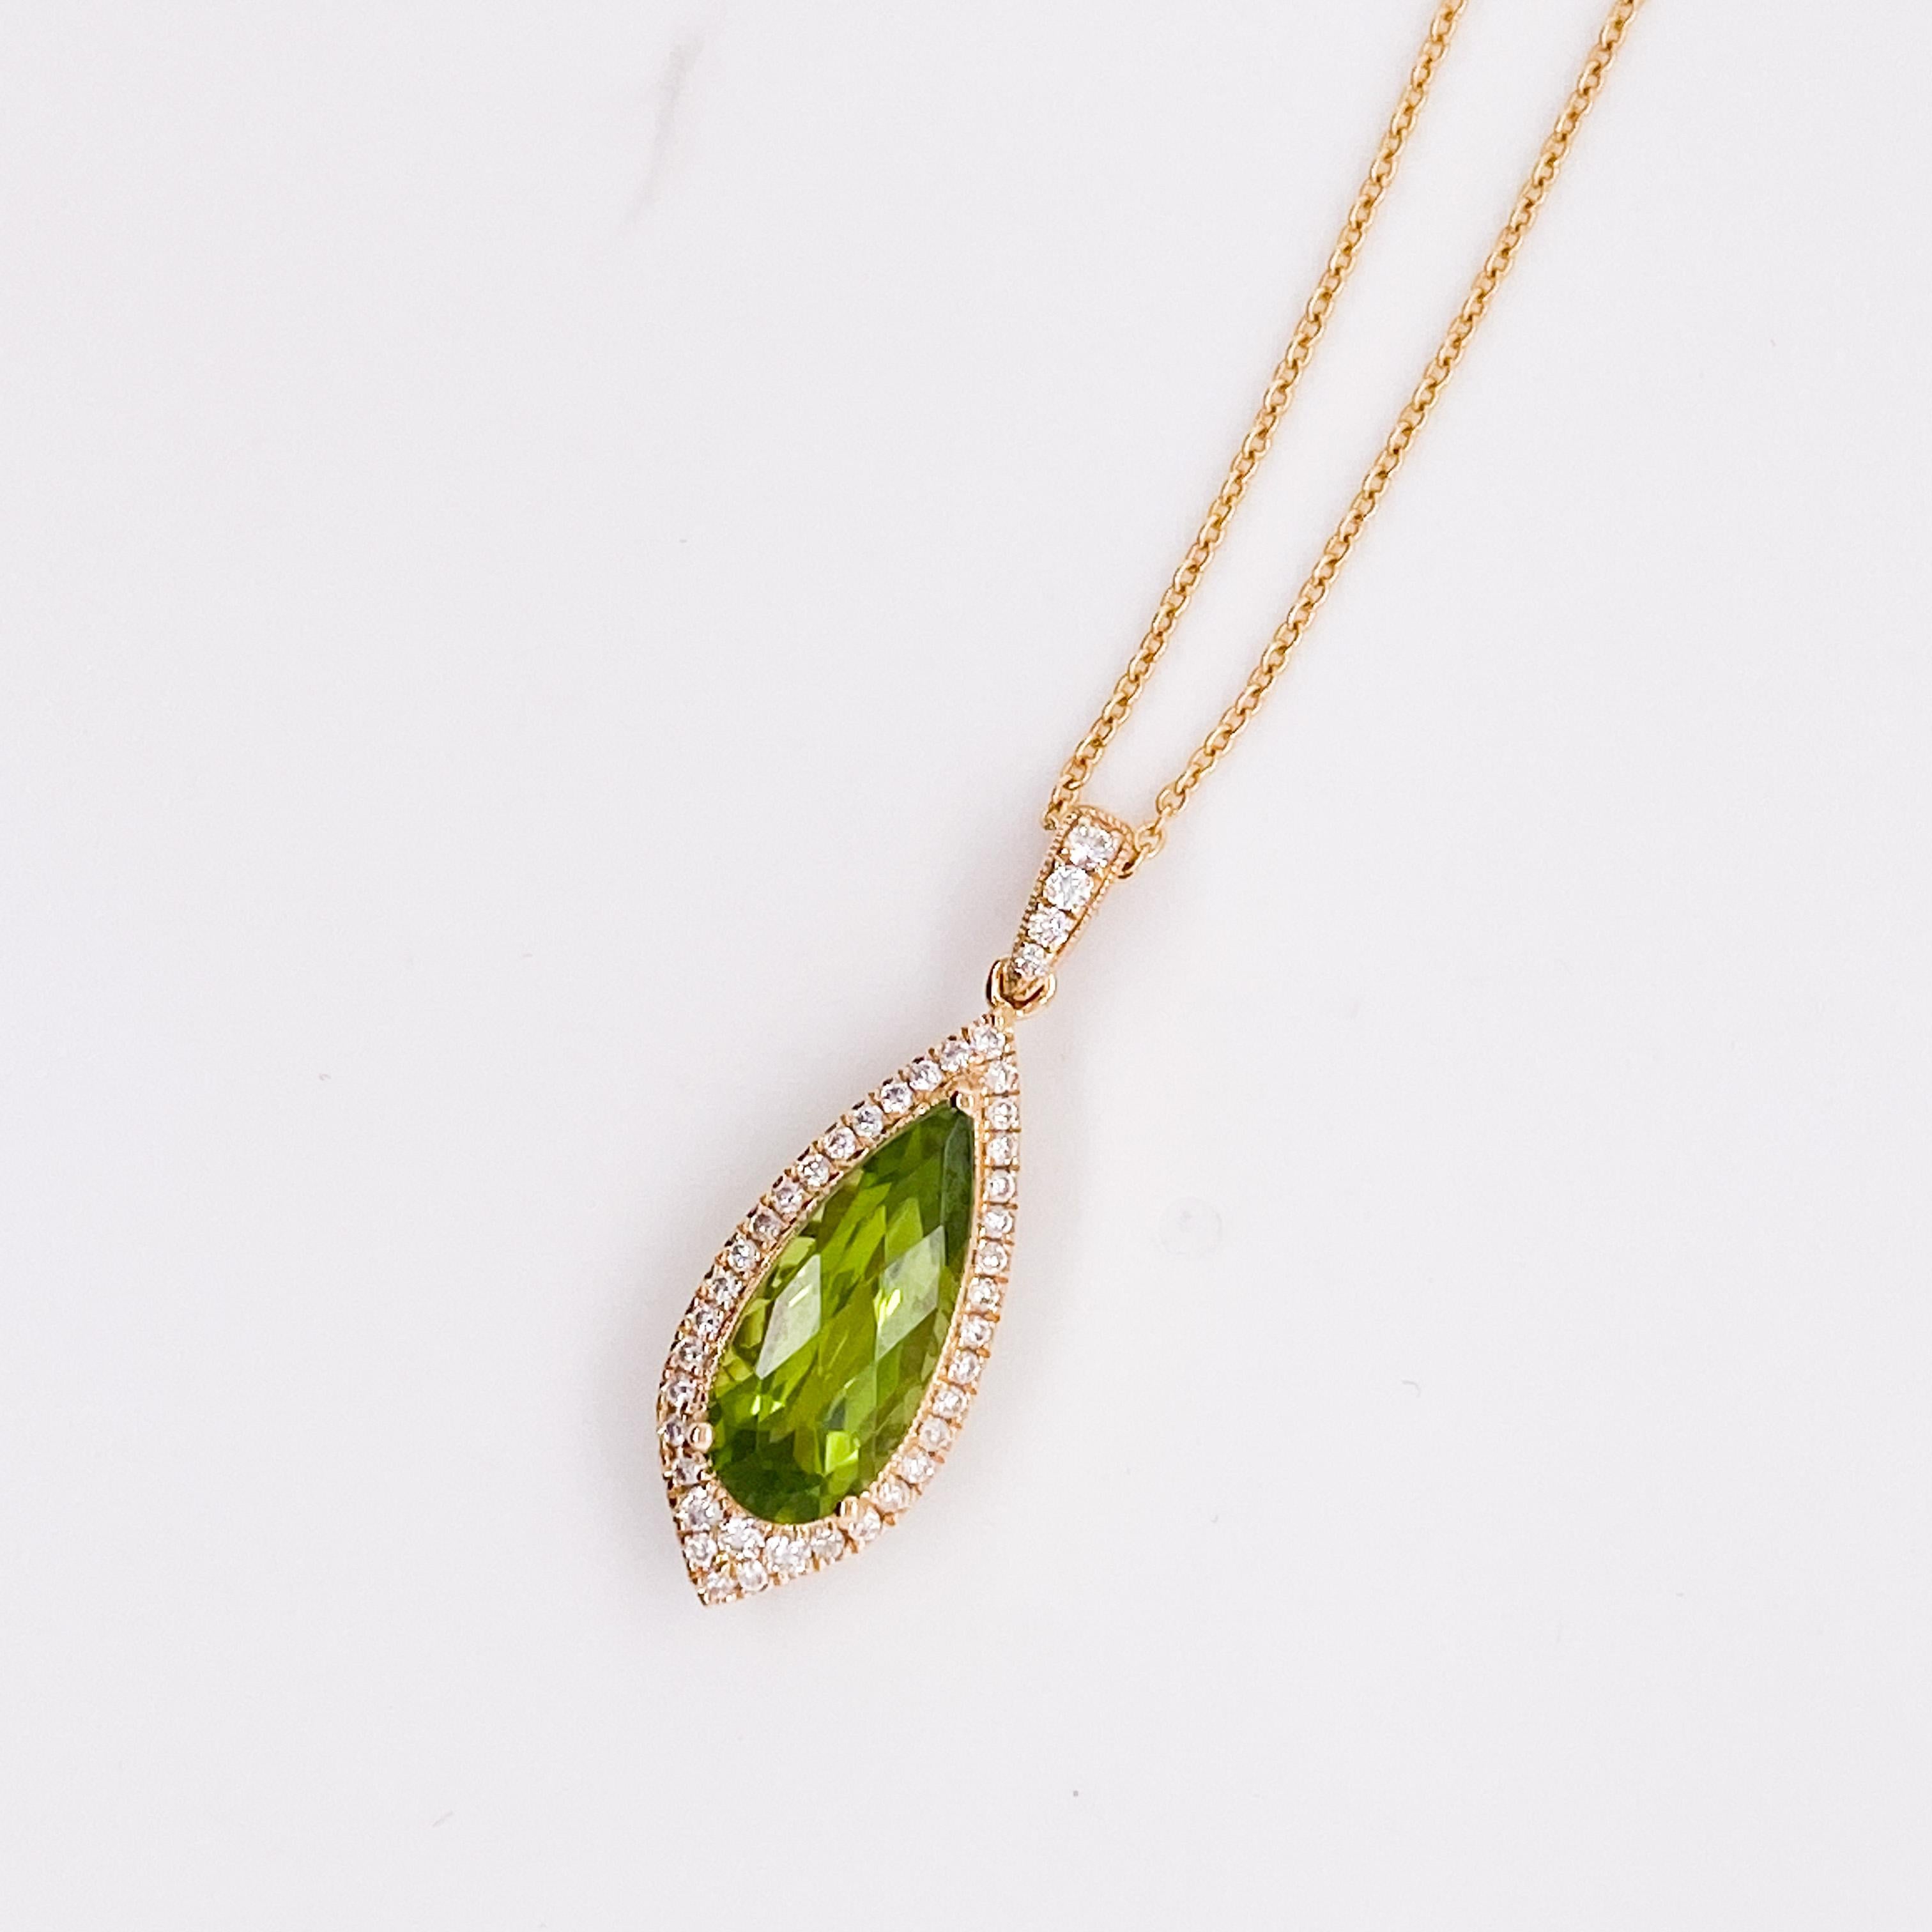 Peridot Total Weight: 2.61 ct
Diamond Total Weight: 0.24 ct